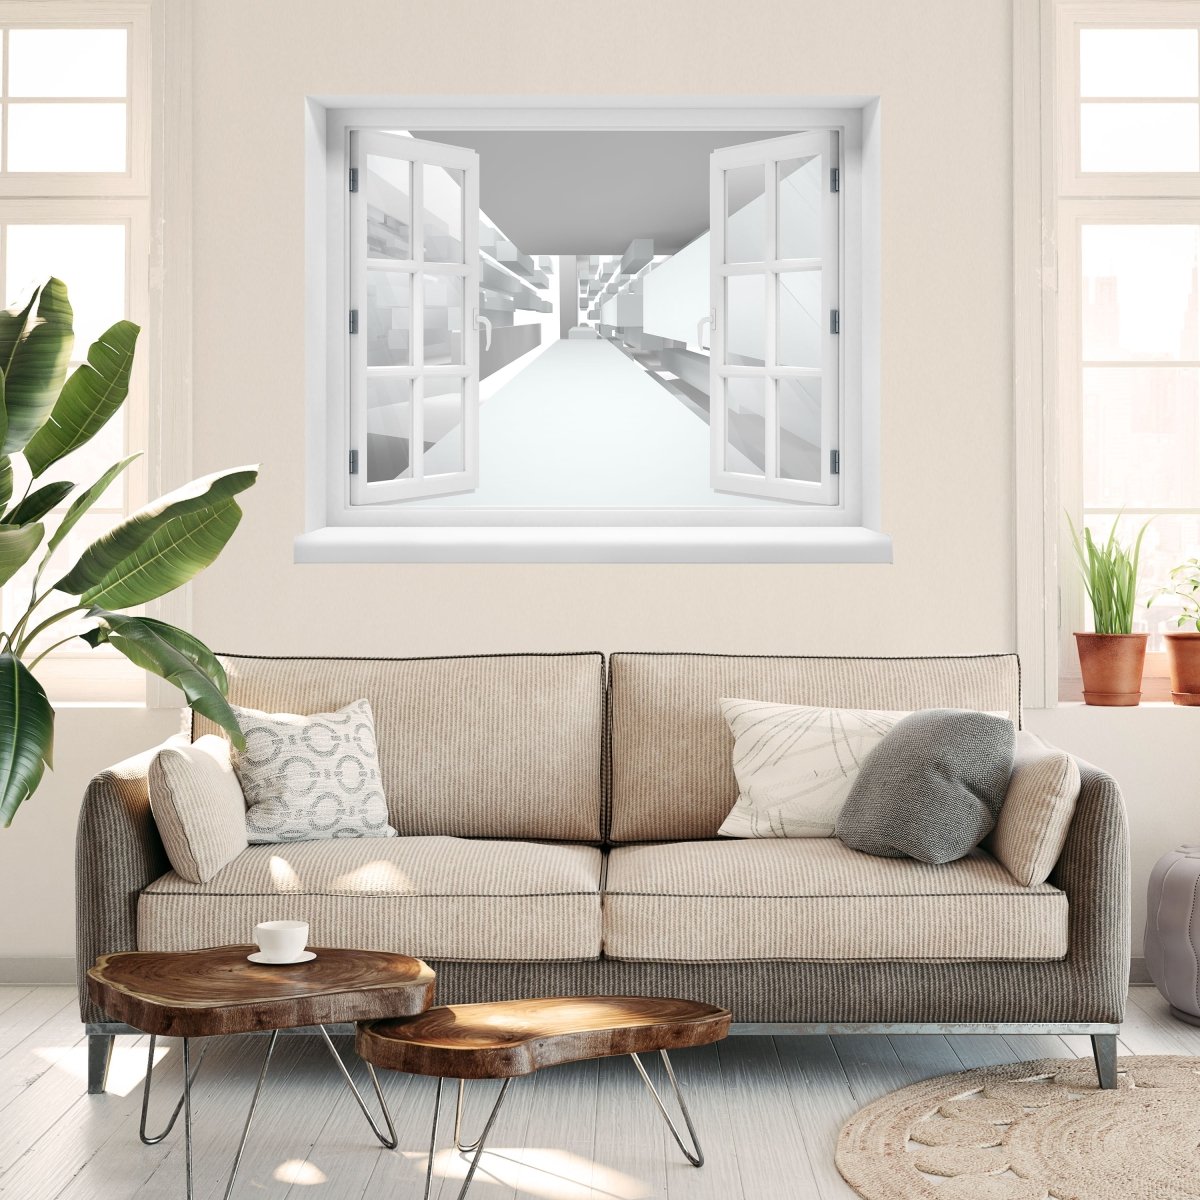 3D Wall Sticker Abstract White Architecture - Wall Decal M0787